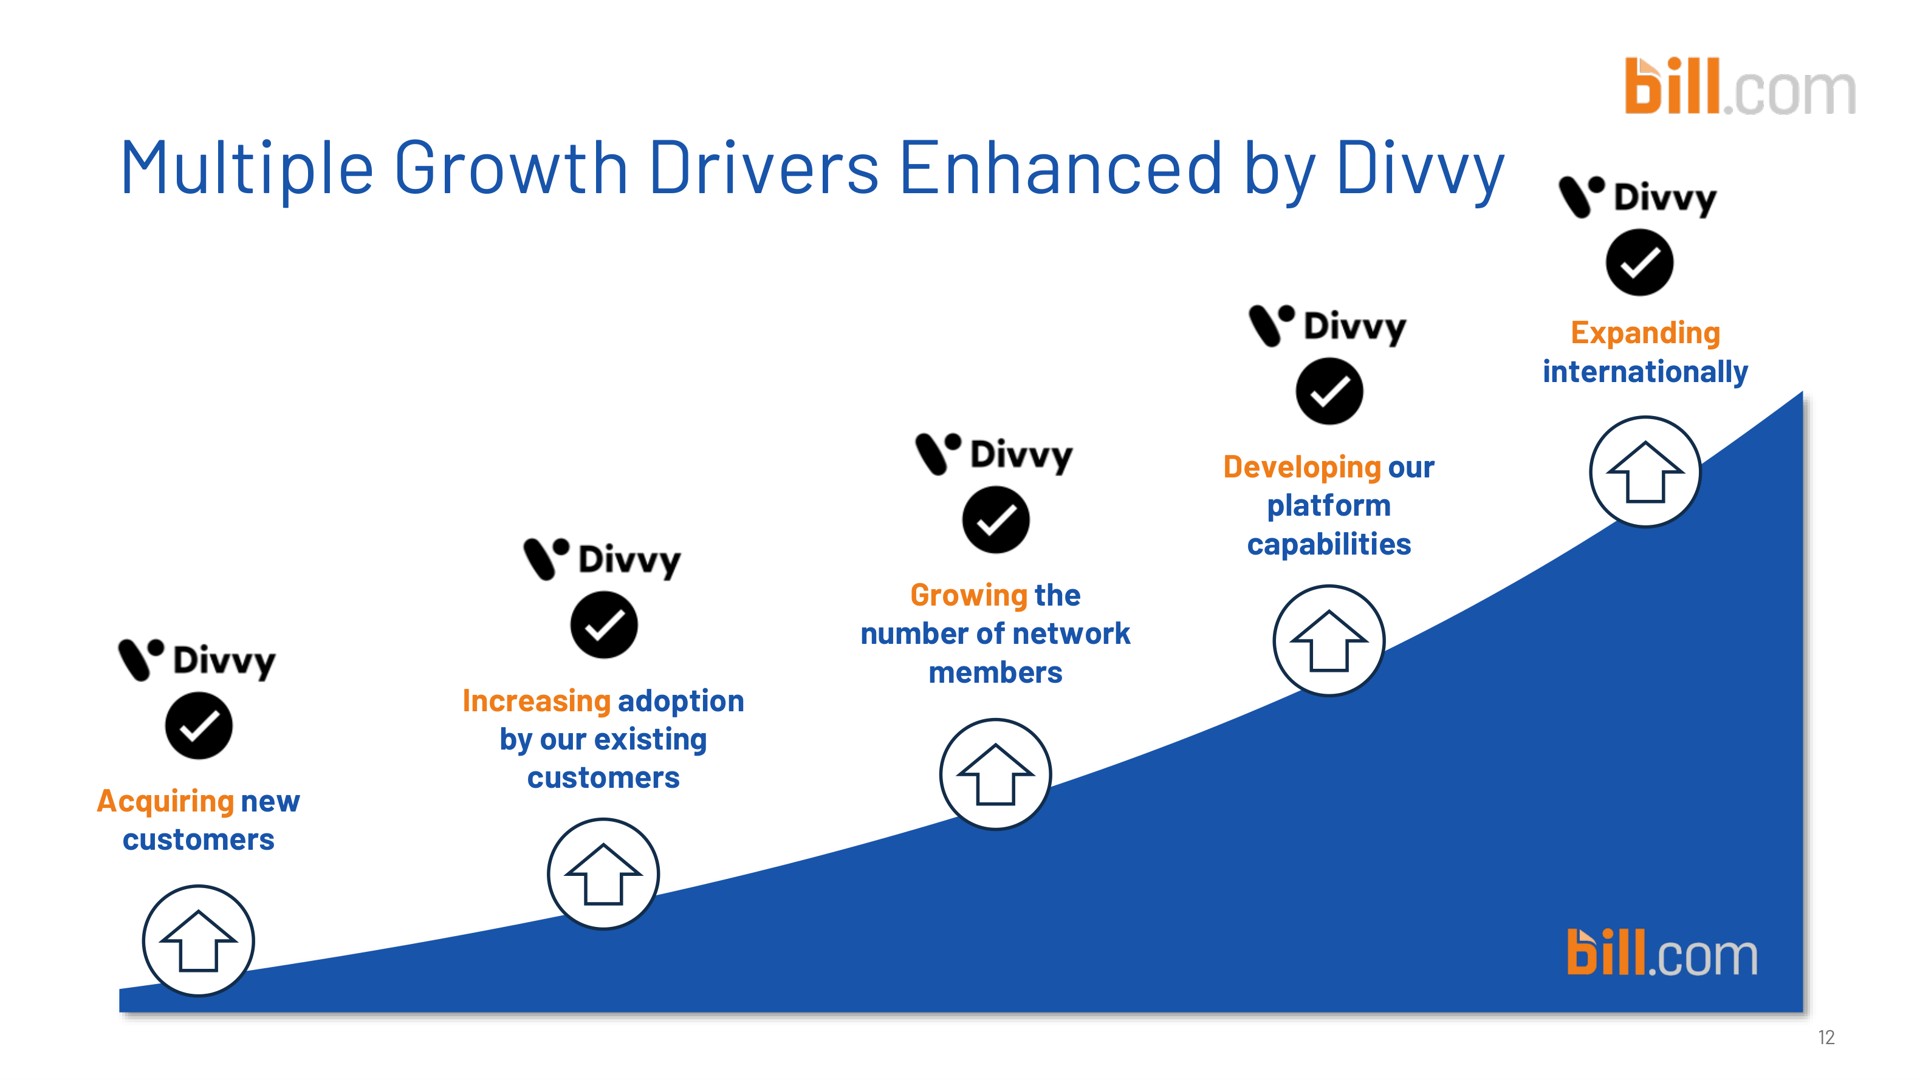 multiple growth drivers to leverage multiple growth drivers enhanced by divvy bill | Bill.com